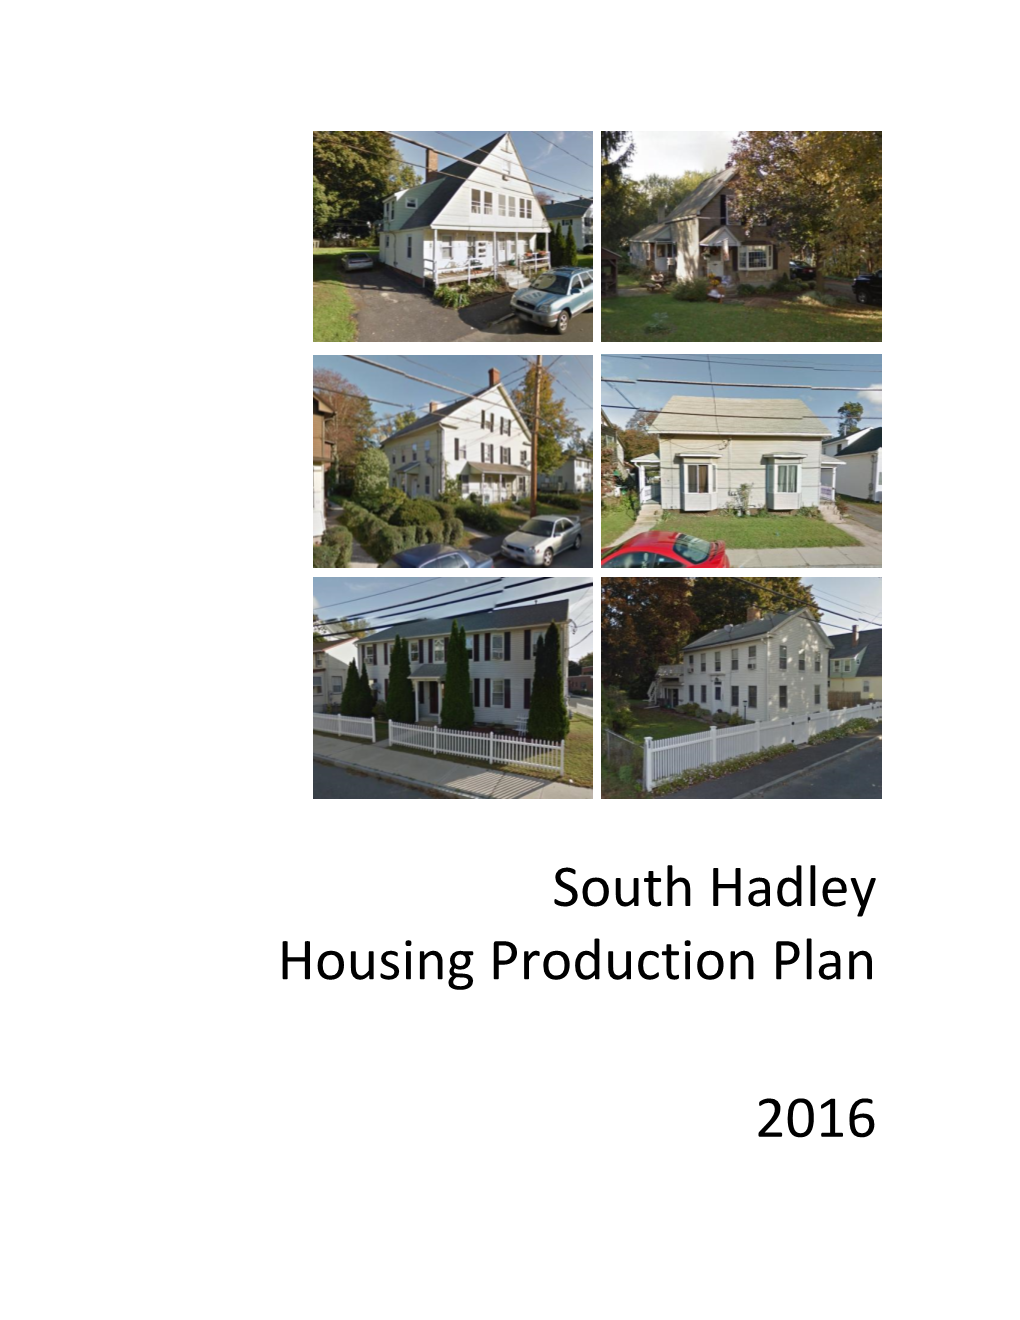 South Hadley Housing Production Plan